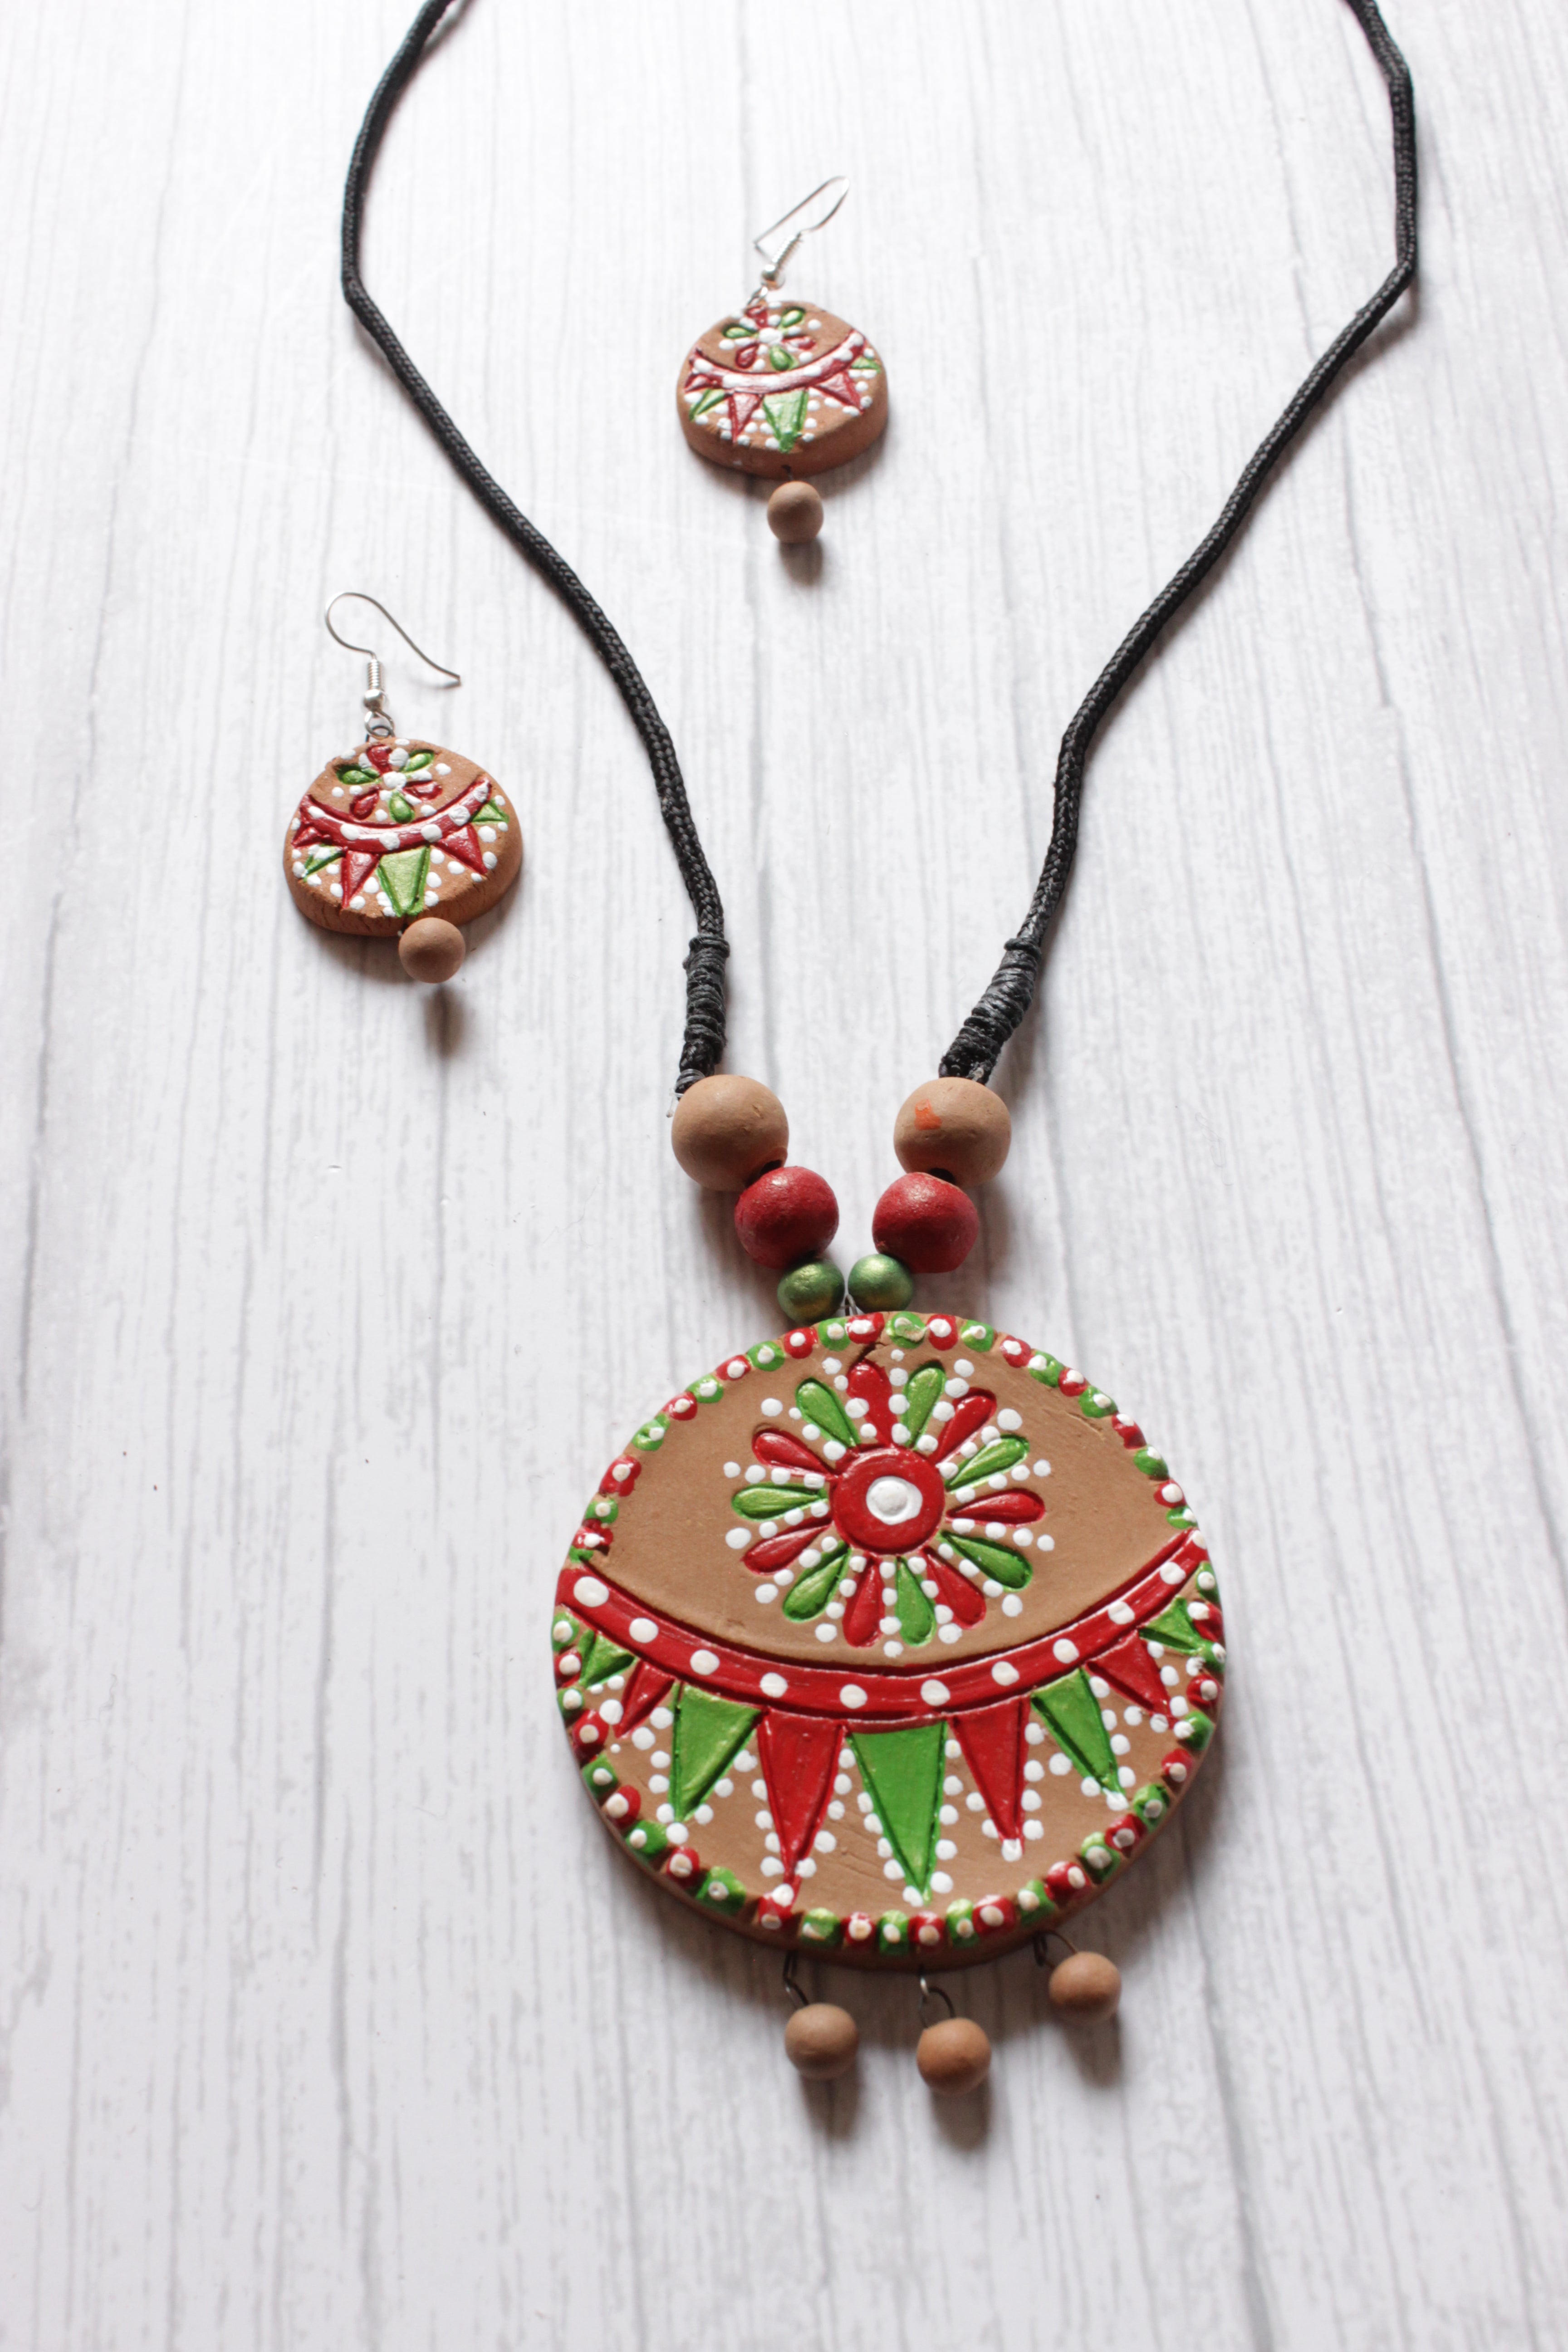 Handcrafted Ethnic Terracotta Clay Necklace Set